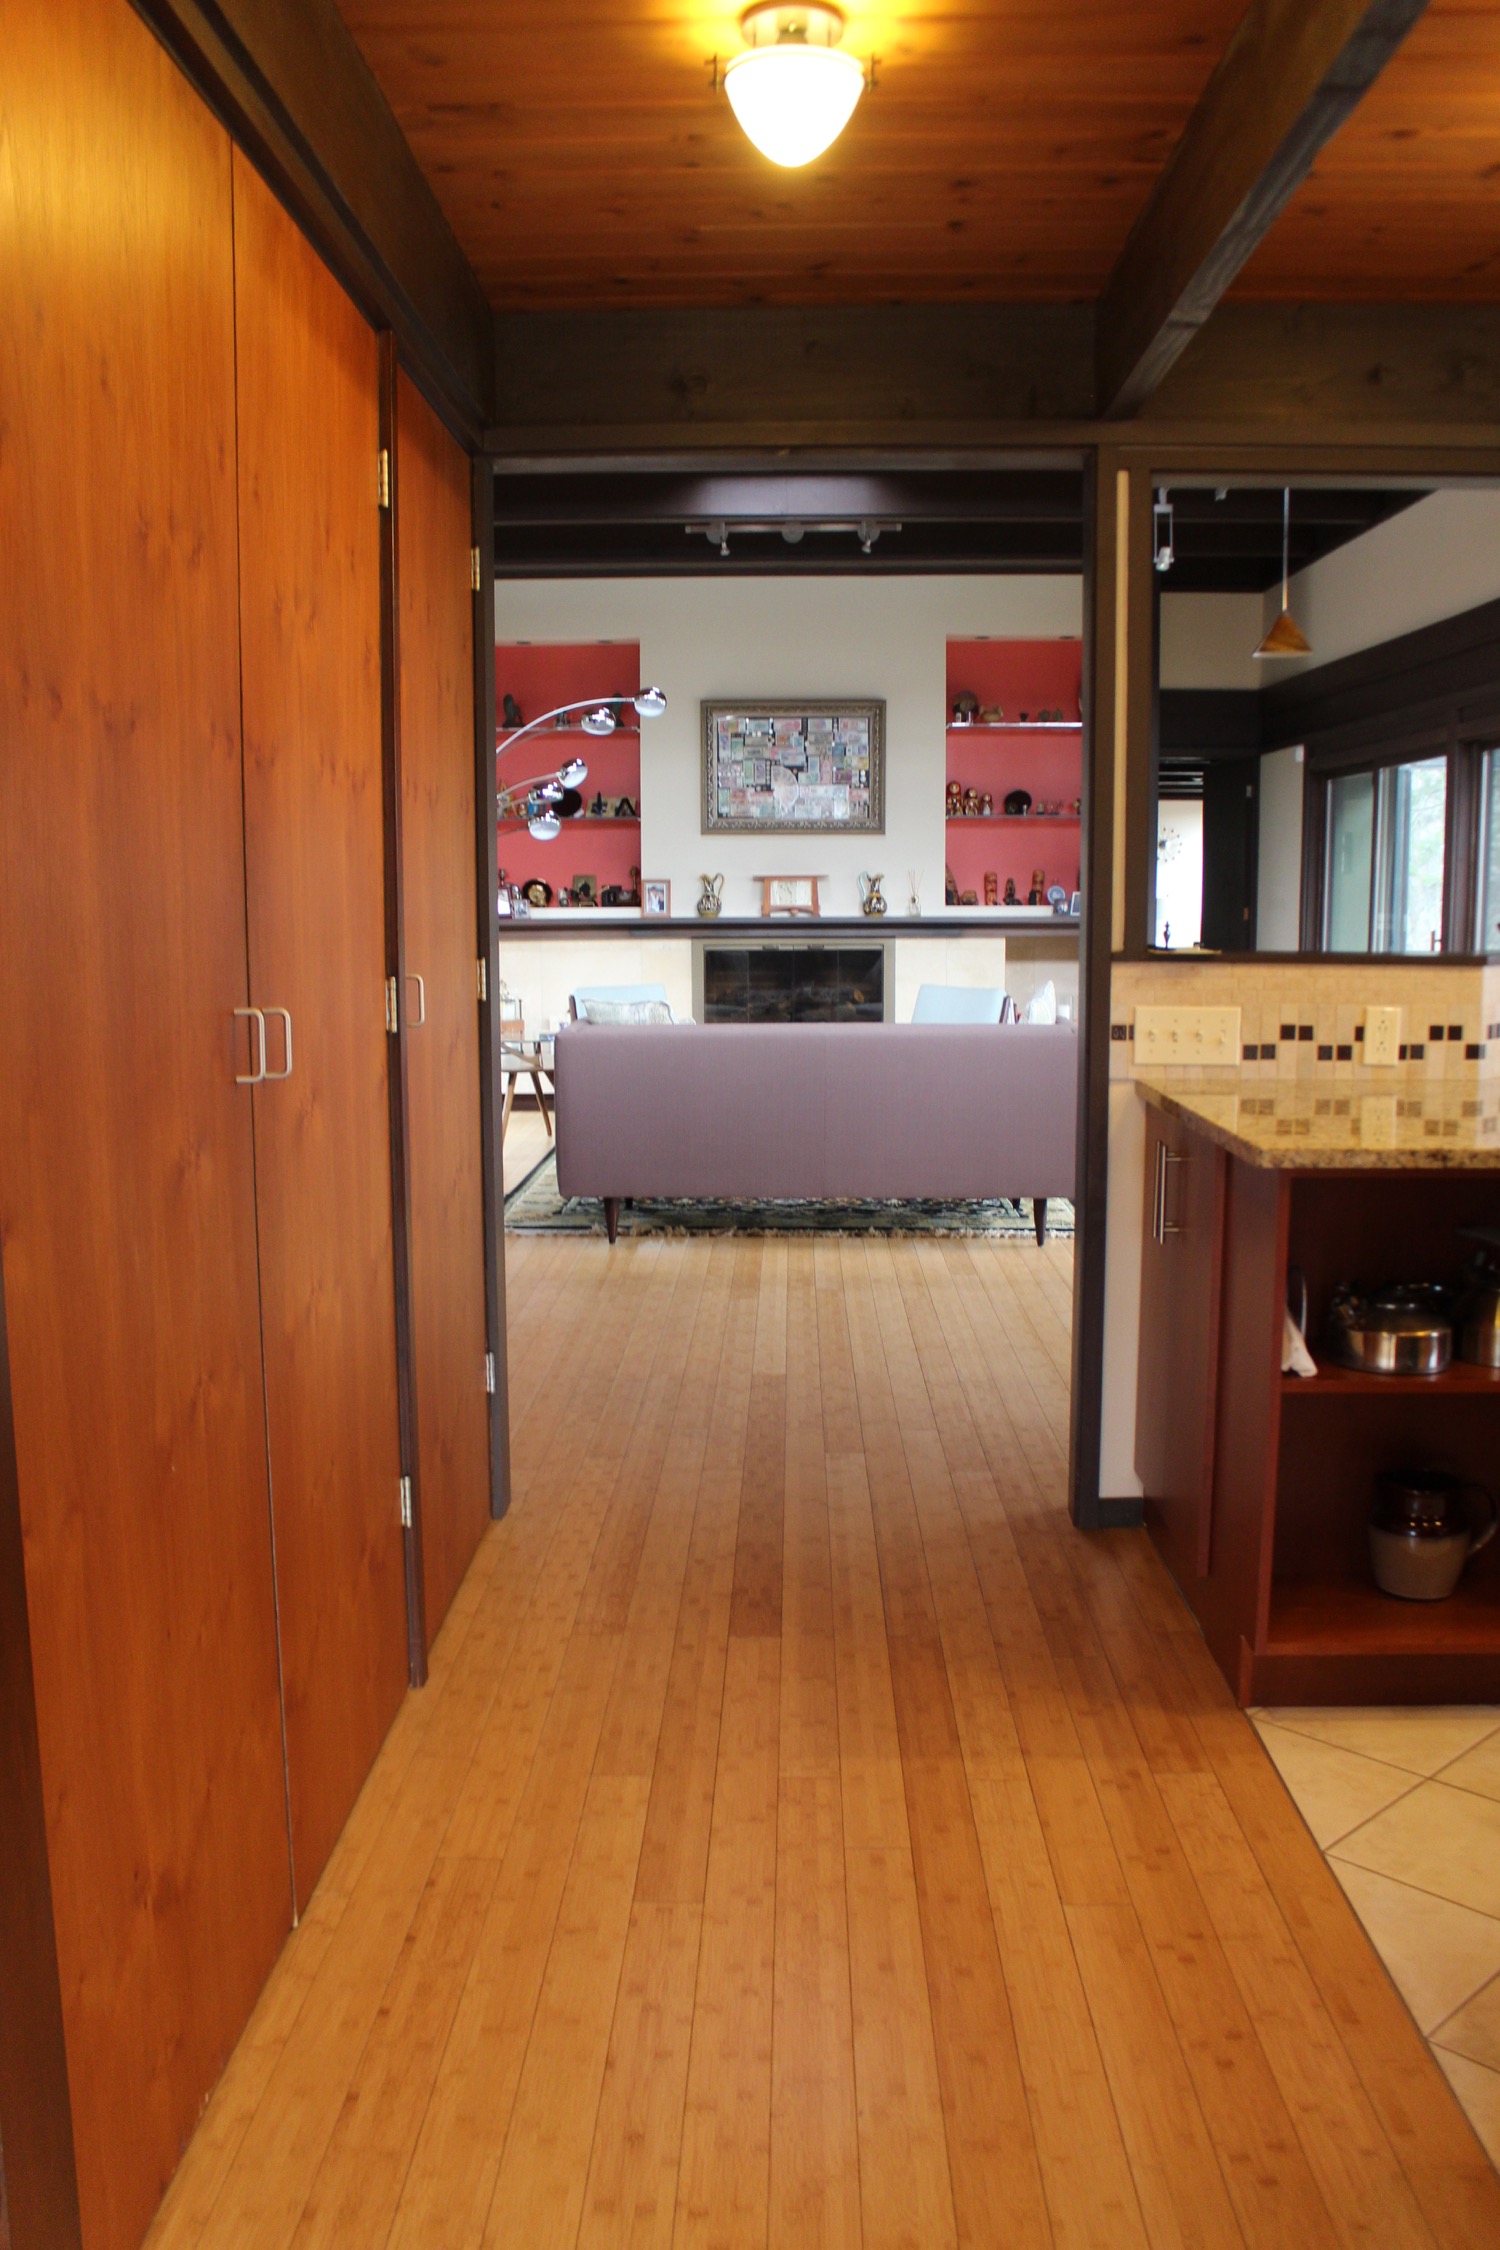 COZY HALL, NEW BAMBOO FLOORS, LOVEY ORIGINAL BUILT-INS DIRECT US THROUGH TO THE VAULTED LIVING ROOM